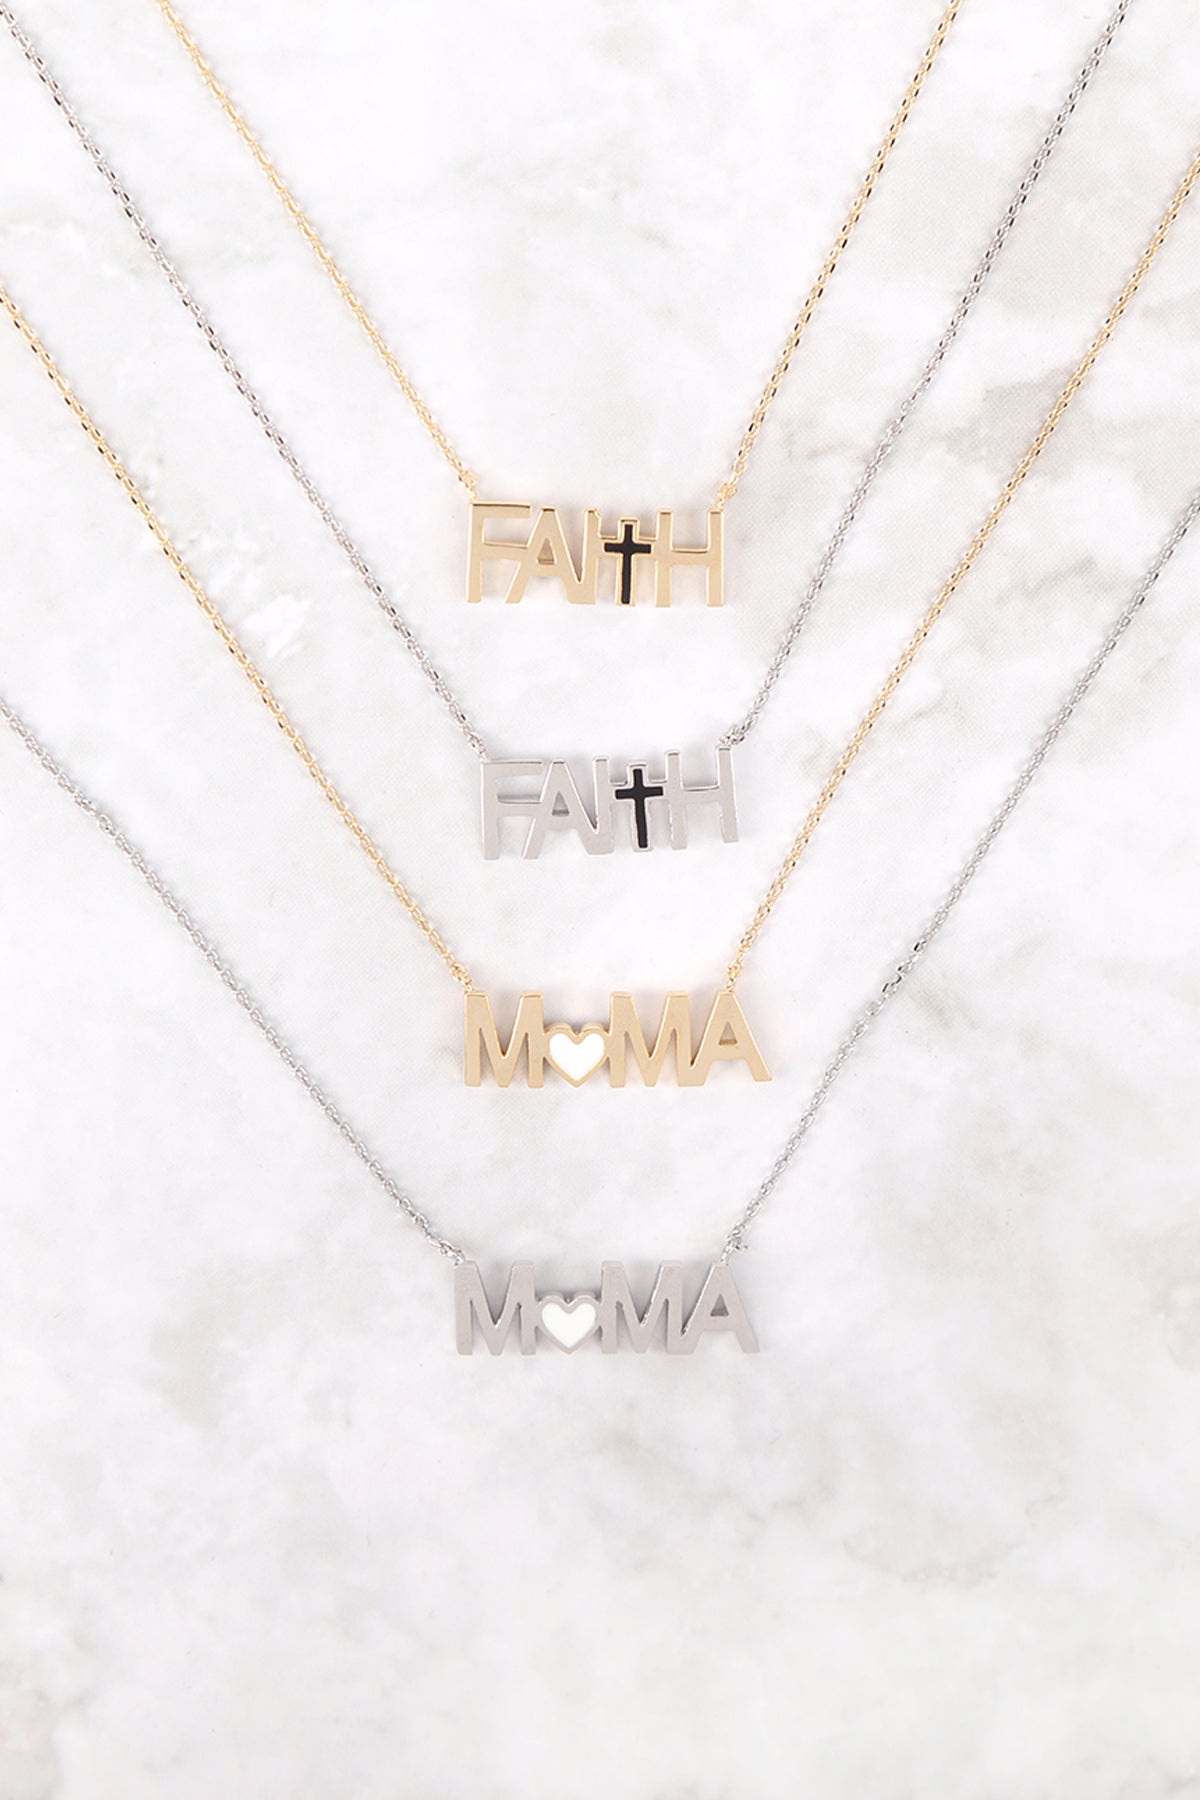 FAITH WITH CROSS INSPIRATIONAL NECKLACE